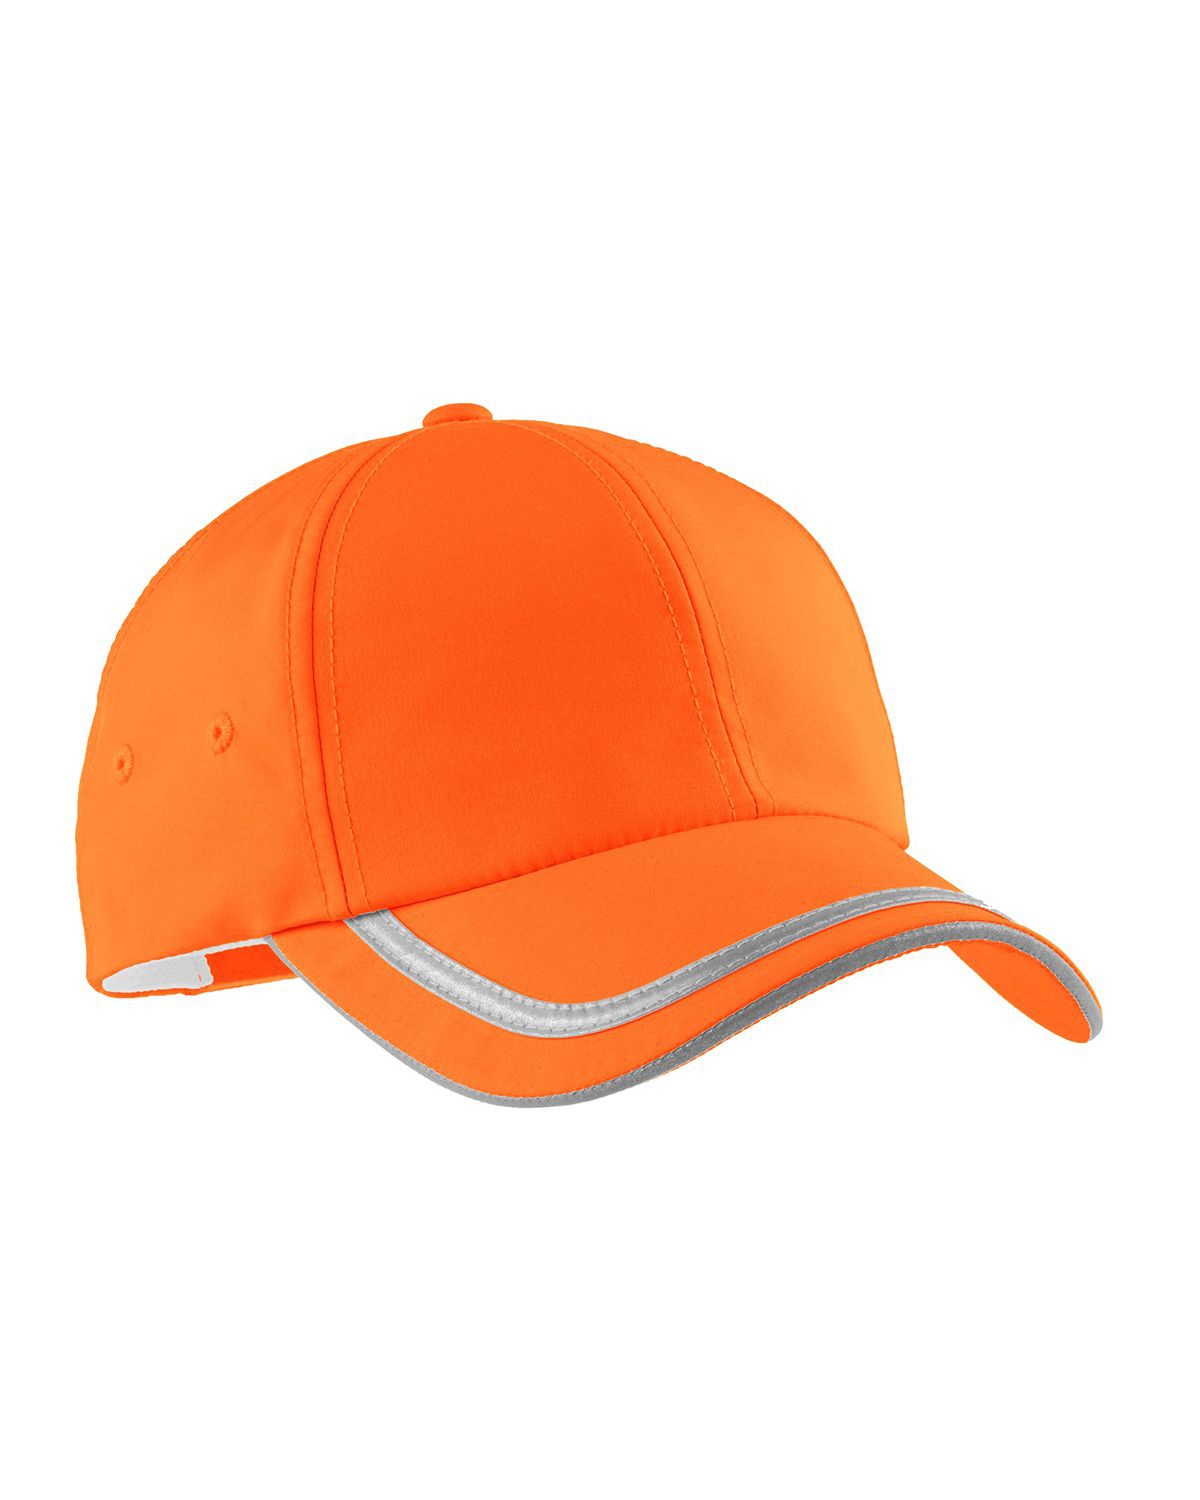 'PPort Authority C836 Adult Enhanced Visibility Cap'